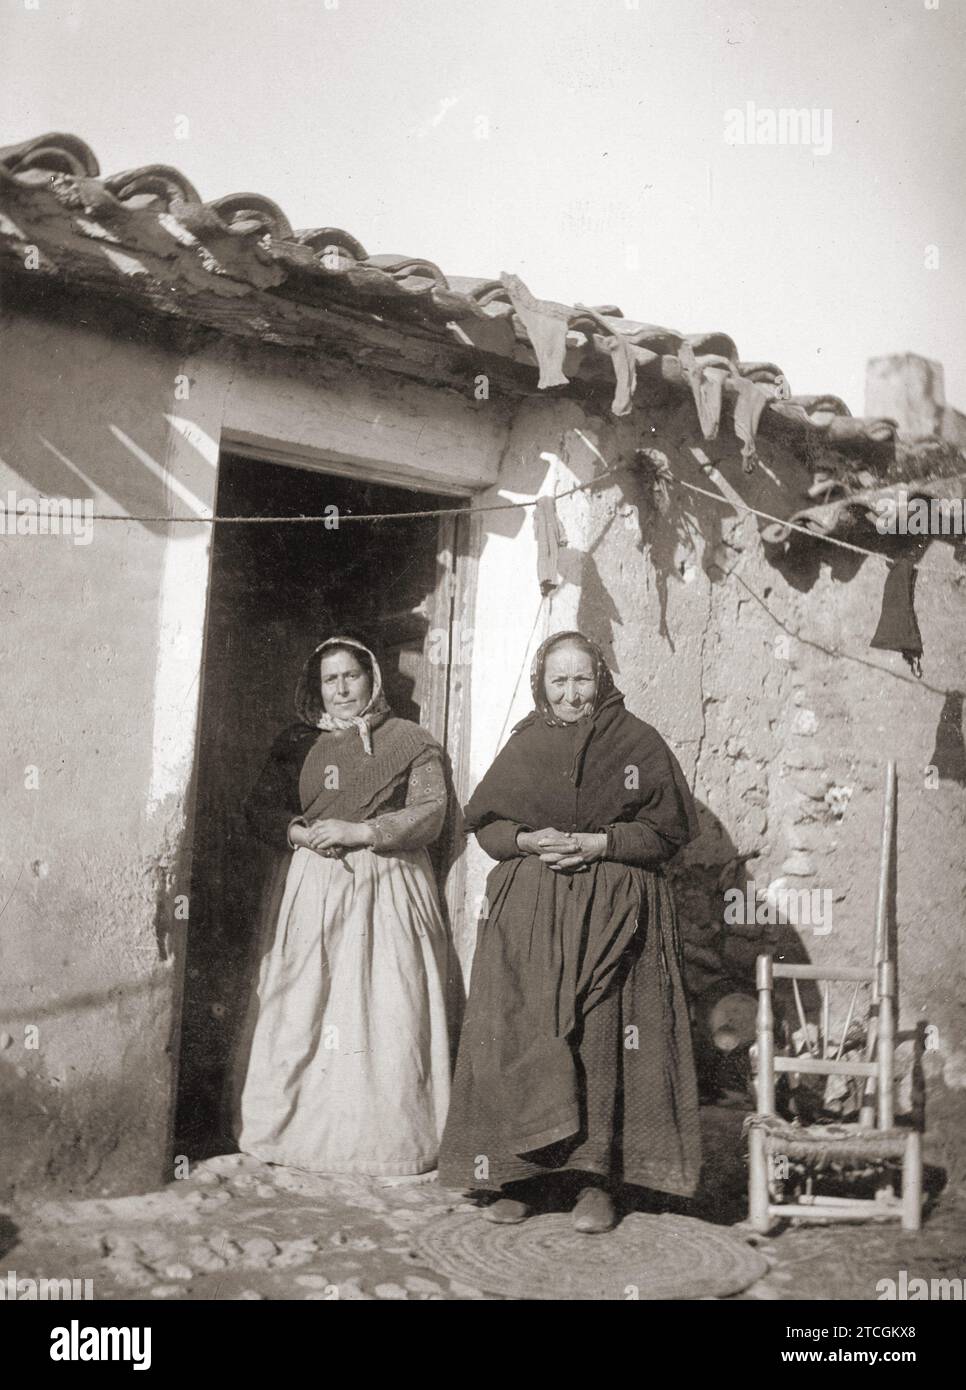 Móstoles, 1908. House where the mayor of Móstoles lived in 1808 and which his descendants preserve. Dolores Godino Torrejón and her daughter Paula Hernández, great-granddaughter and great-great-granddaughter of Andrés Torrejón 'the mayor of Móstoles'. Credit: Album / Archivo ABC / Asenjo Stock Photo